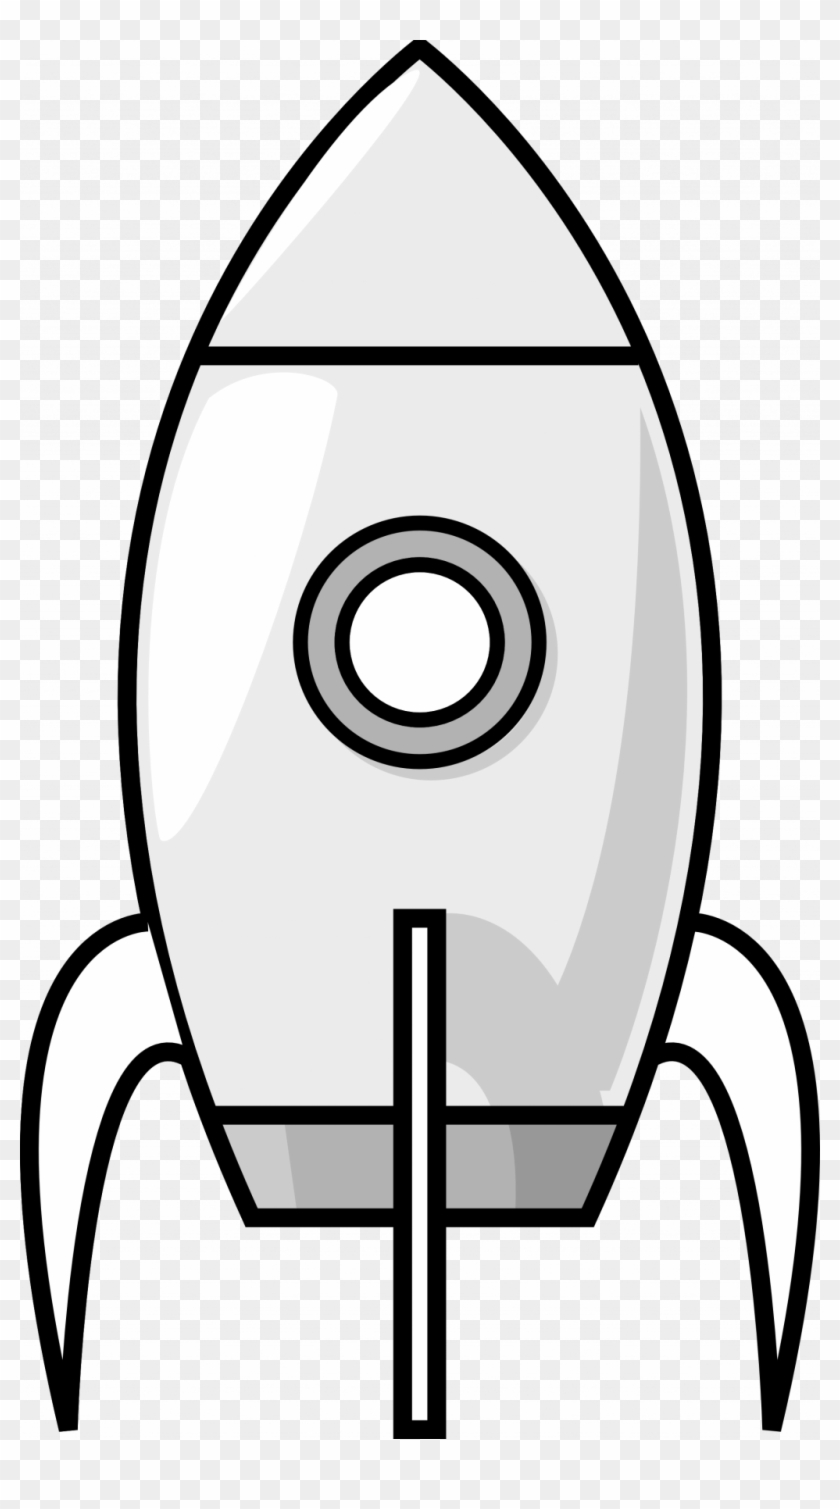 Pocket Clipart Drawn - Rocket Clipart Black And White #1416287